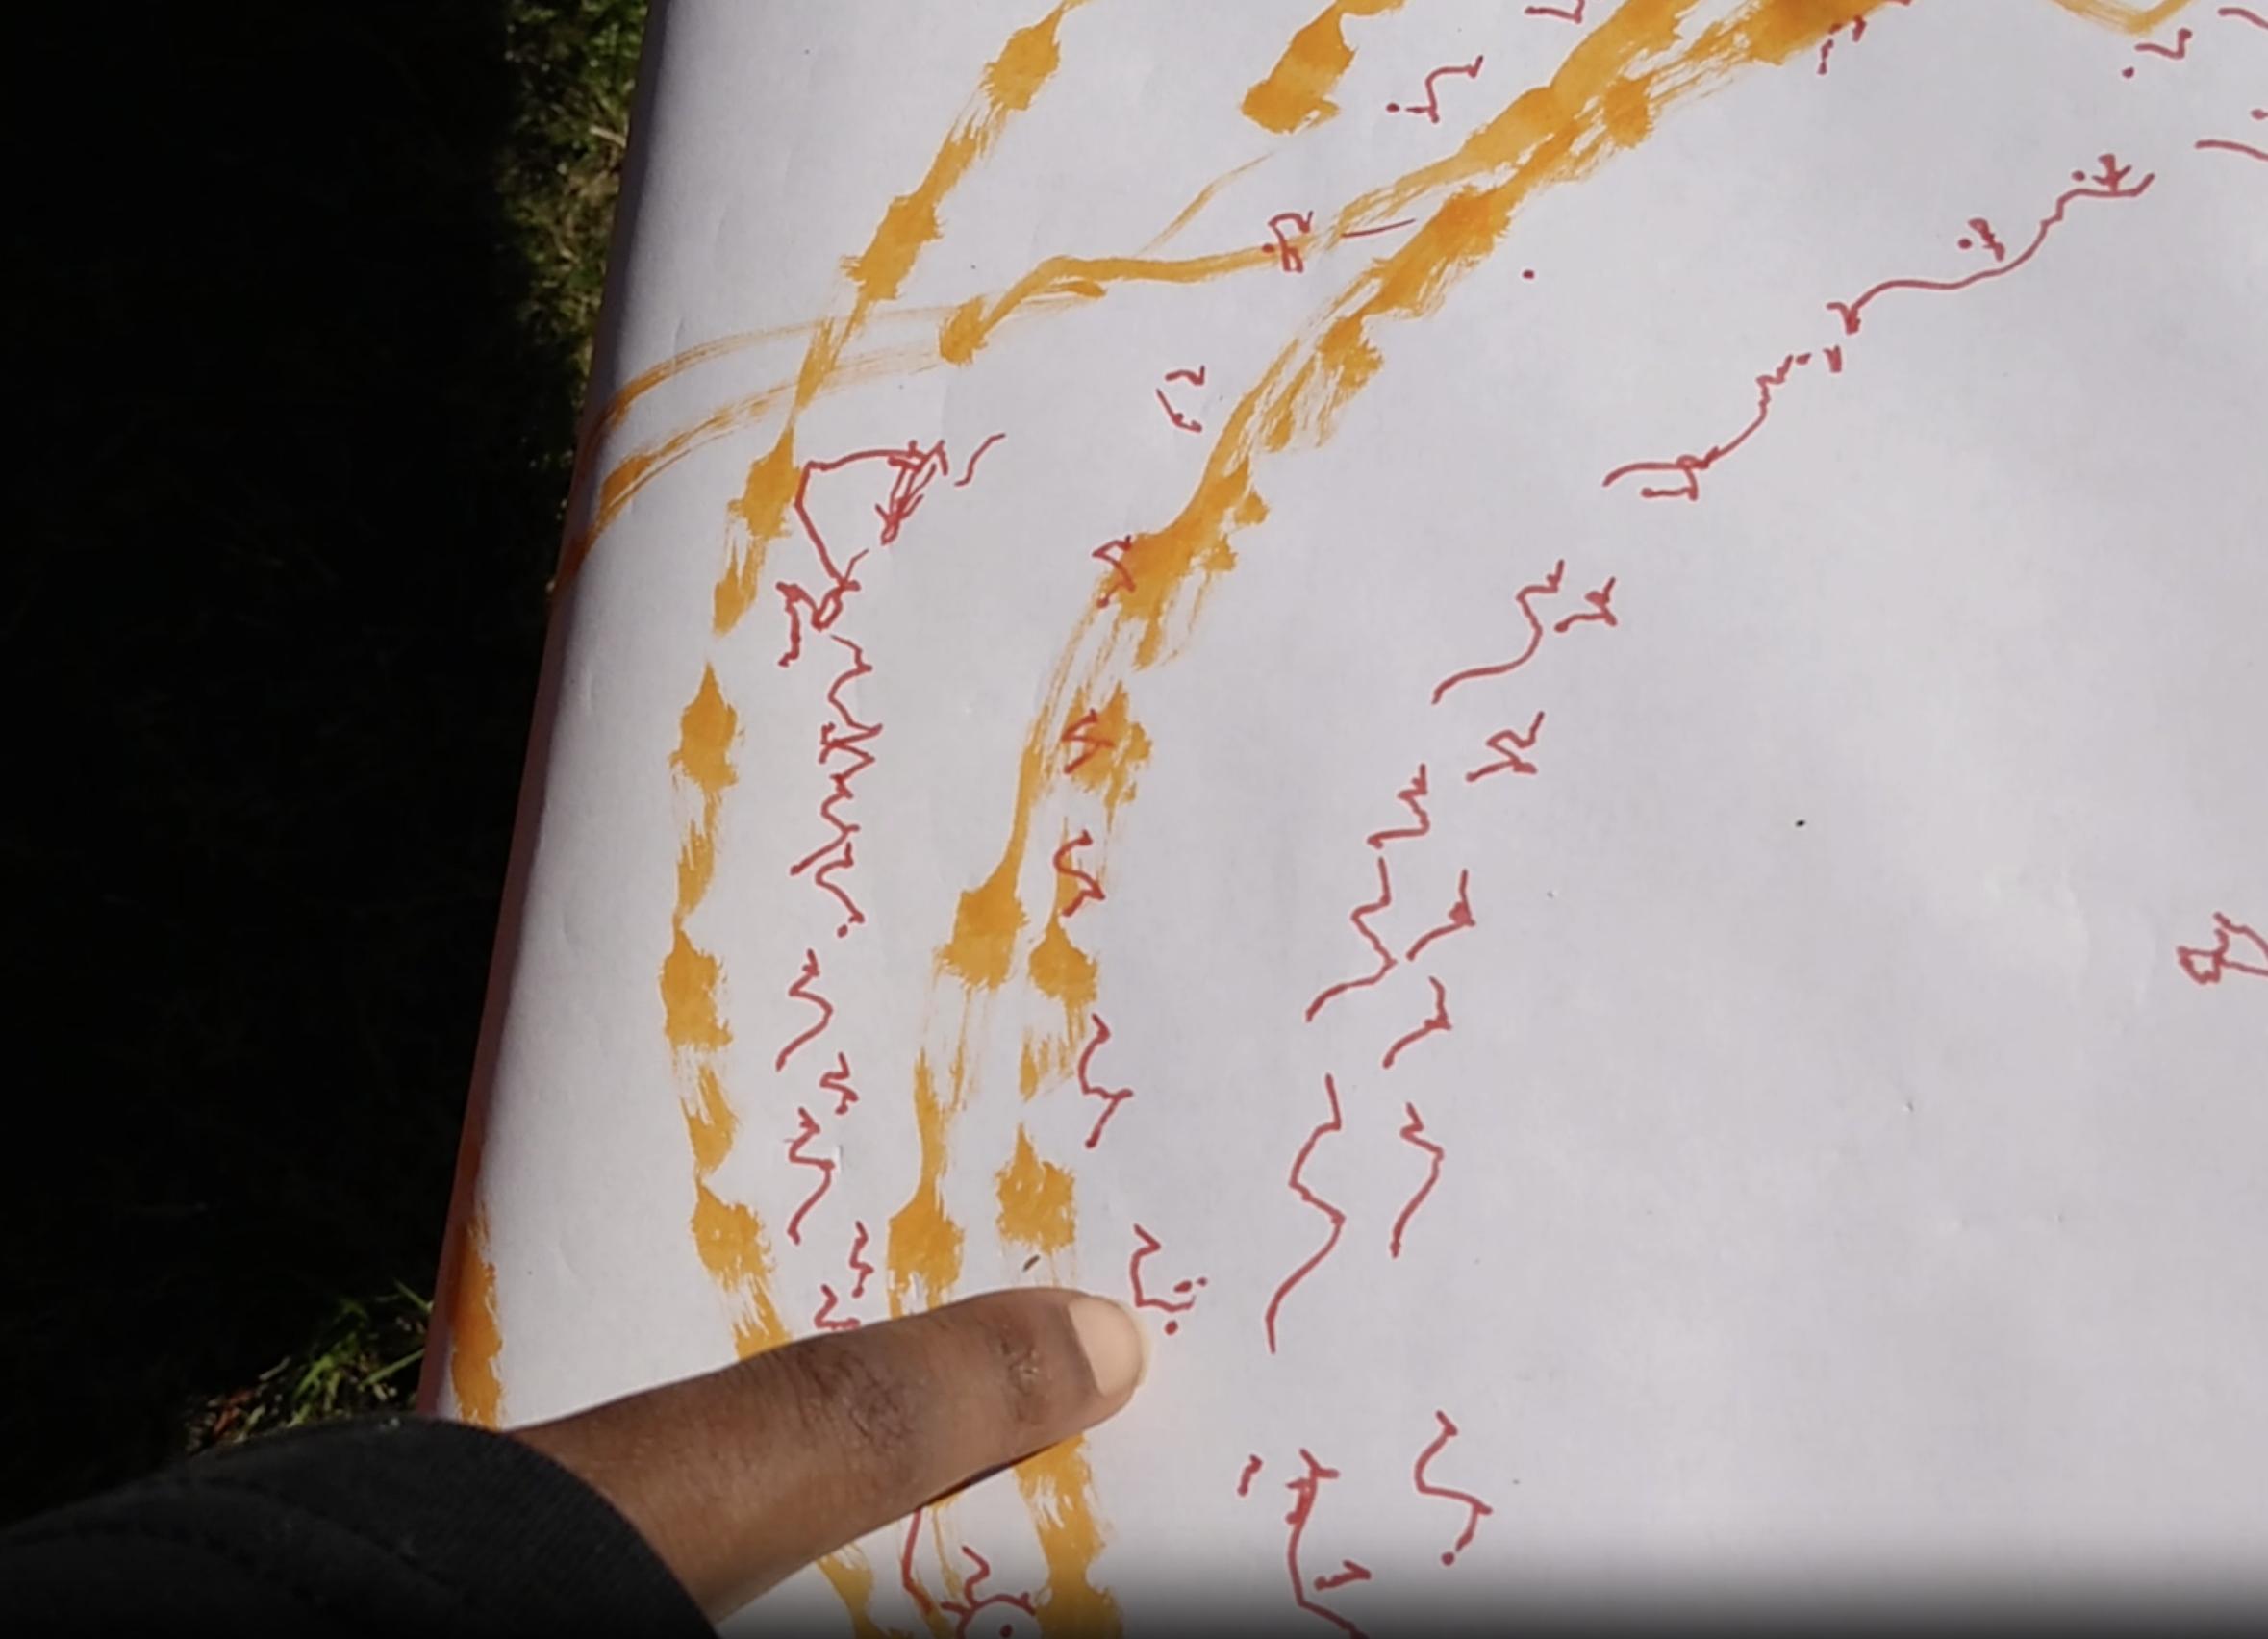 Marks similar to writing that participants came upon during the *Drawing with the Sun* activity I ran in the EER *More than Human* workshop, September 2021